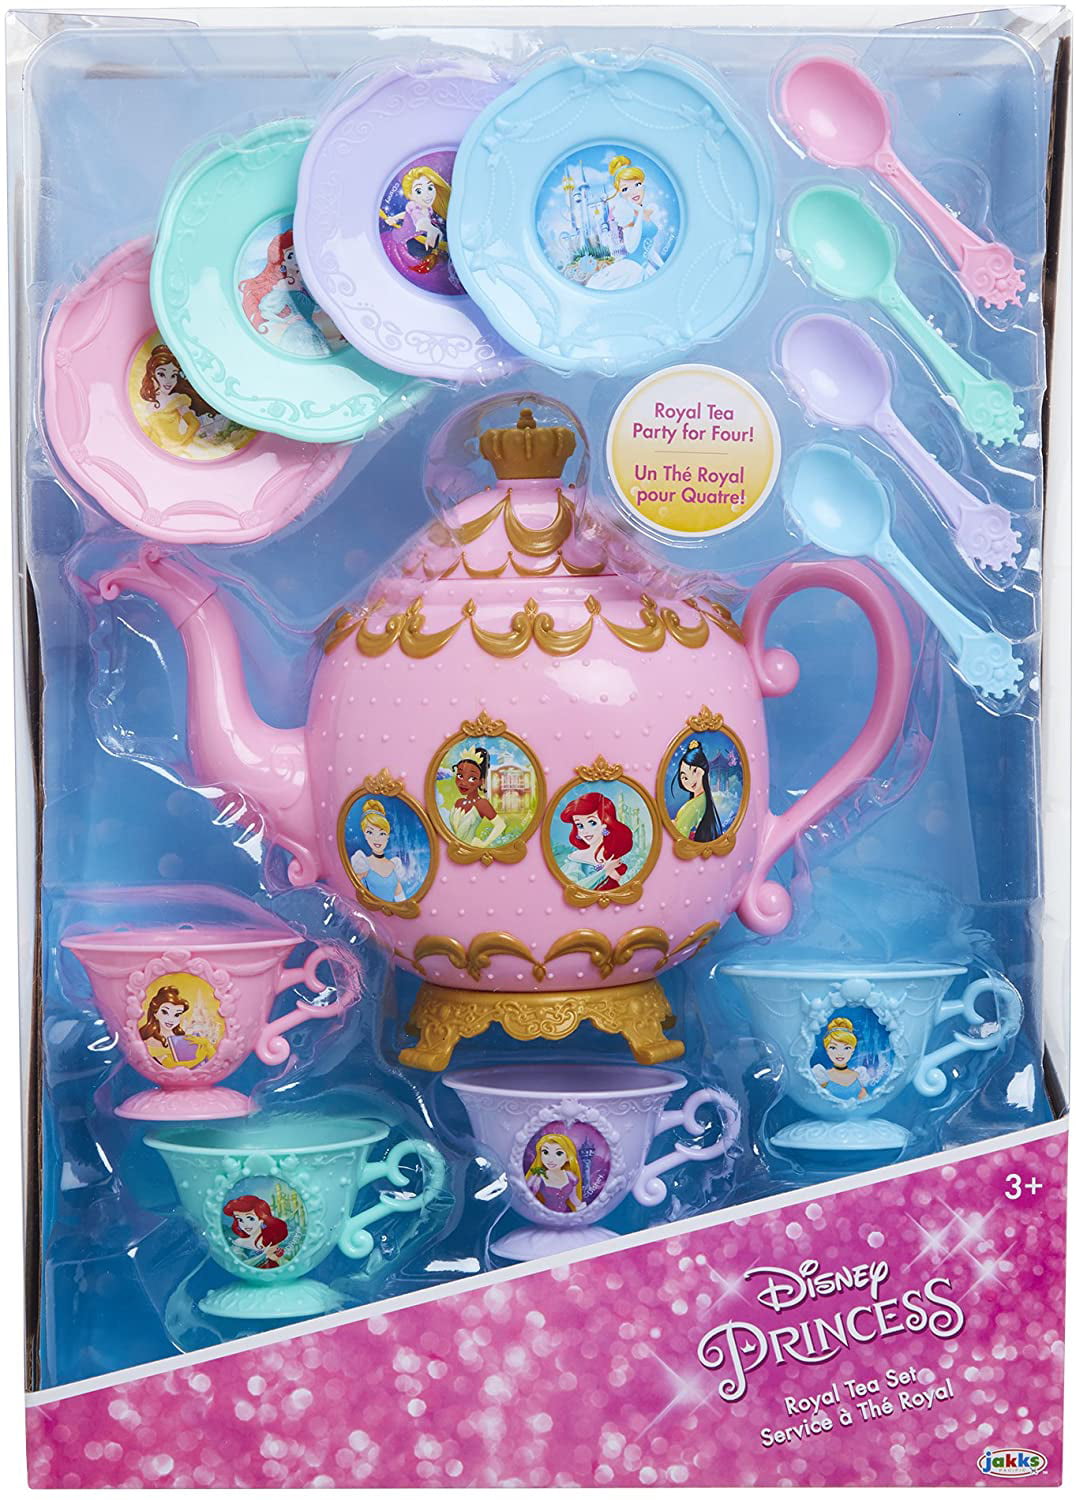 Have a party fit for royal-tea with this new Disney Princess